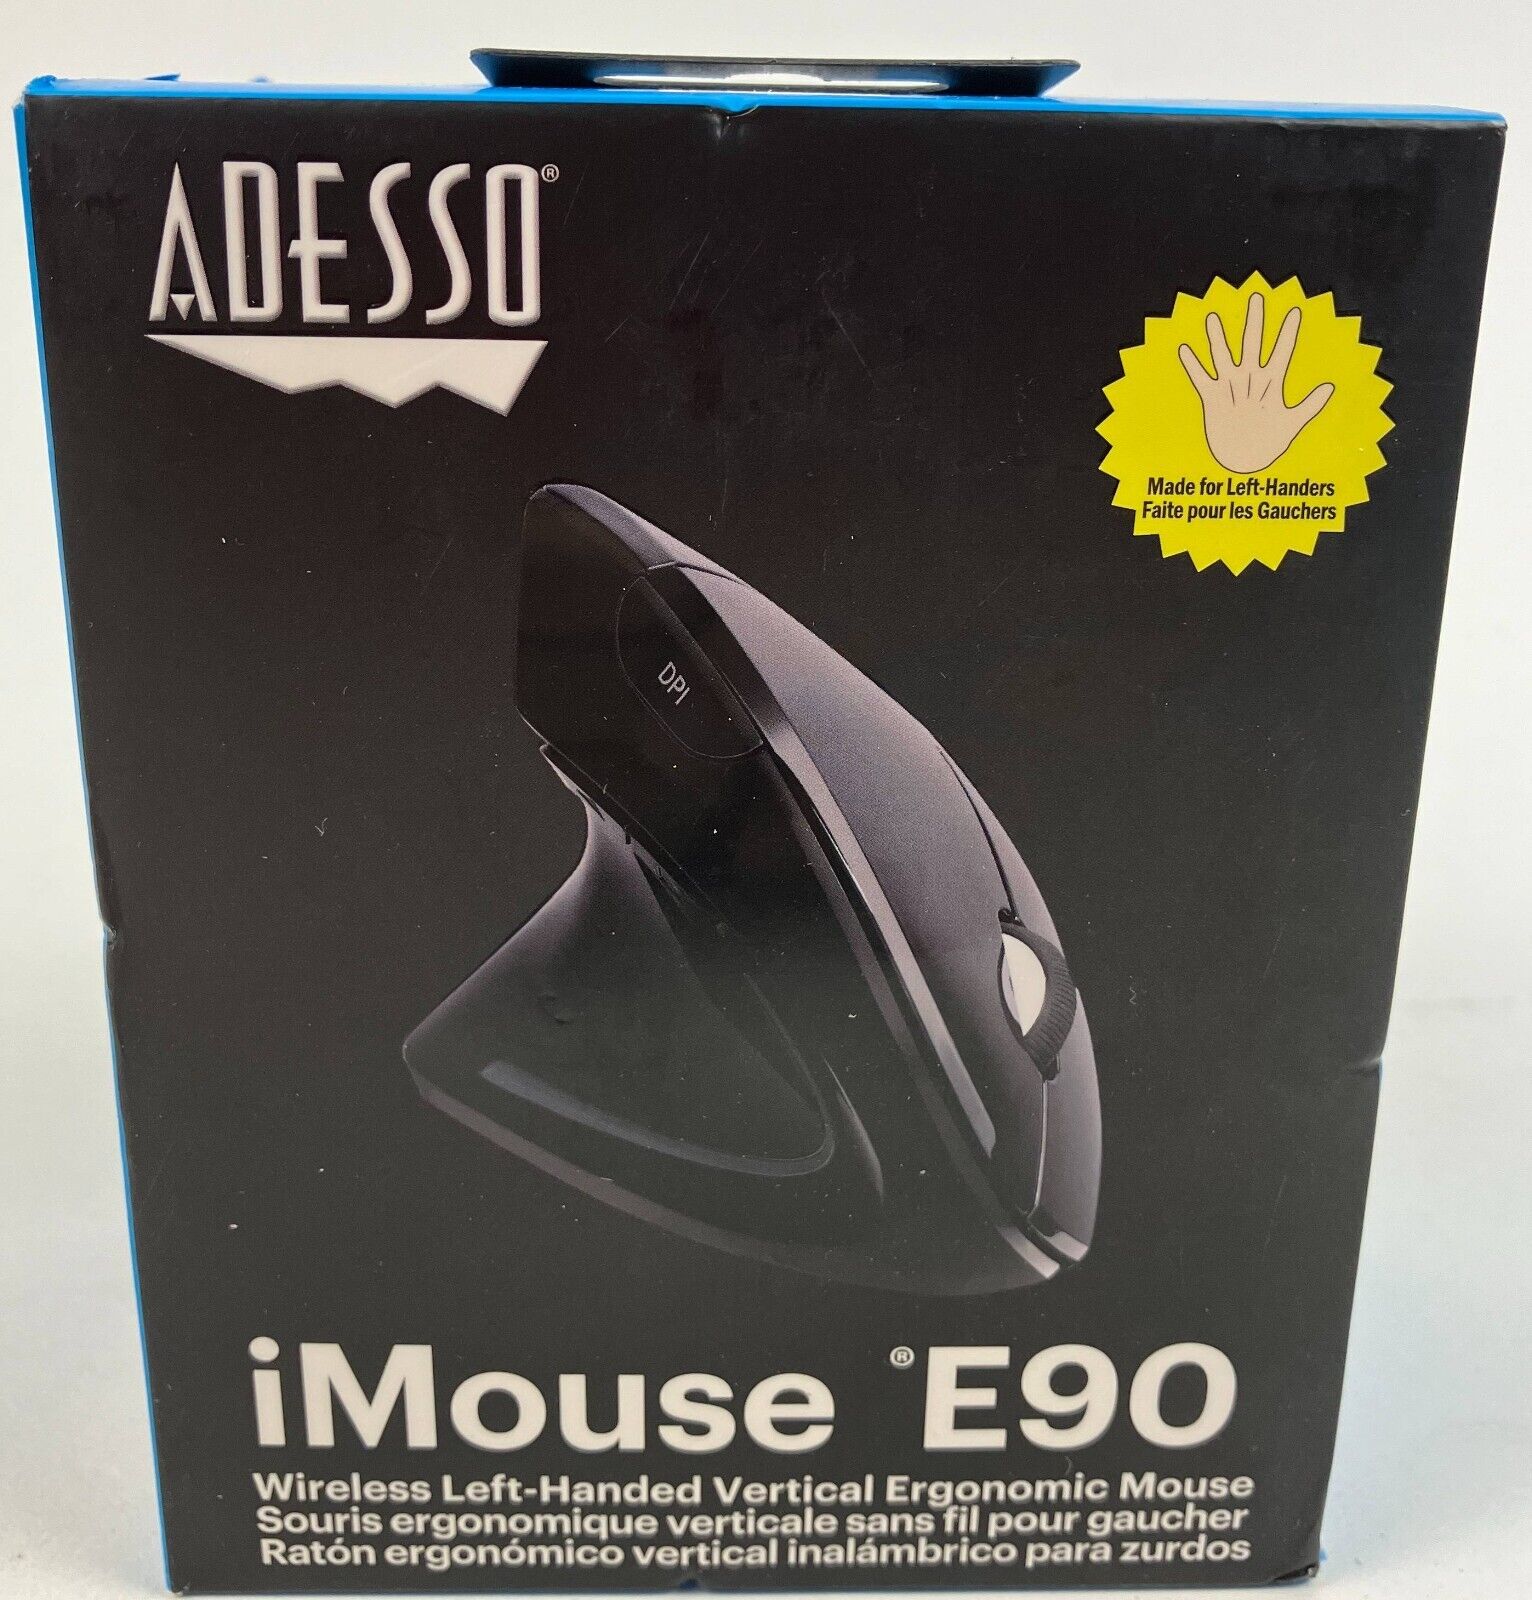 Adesso iMouse E90- Wireless Left-Handed Vertical Ergonomic Mouse (IMOUSEE90)